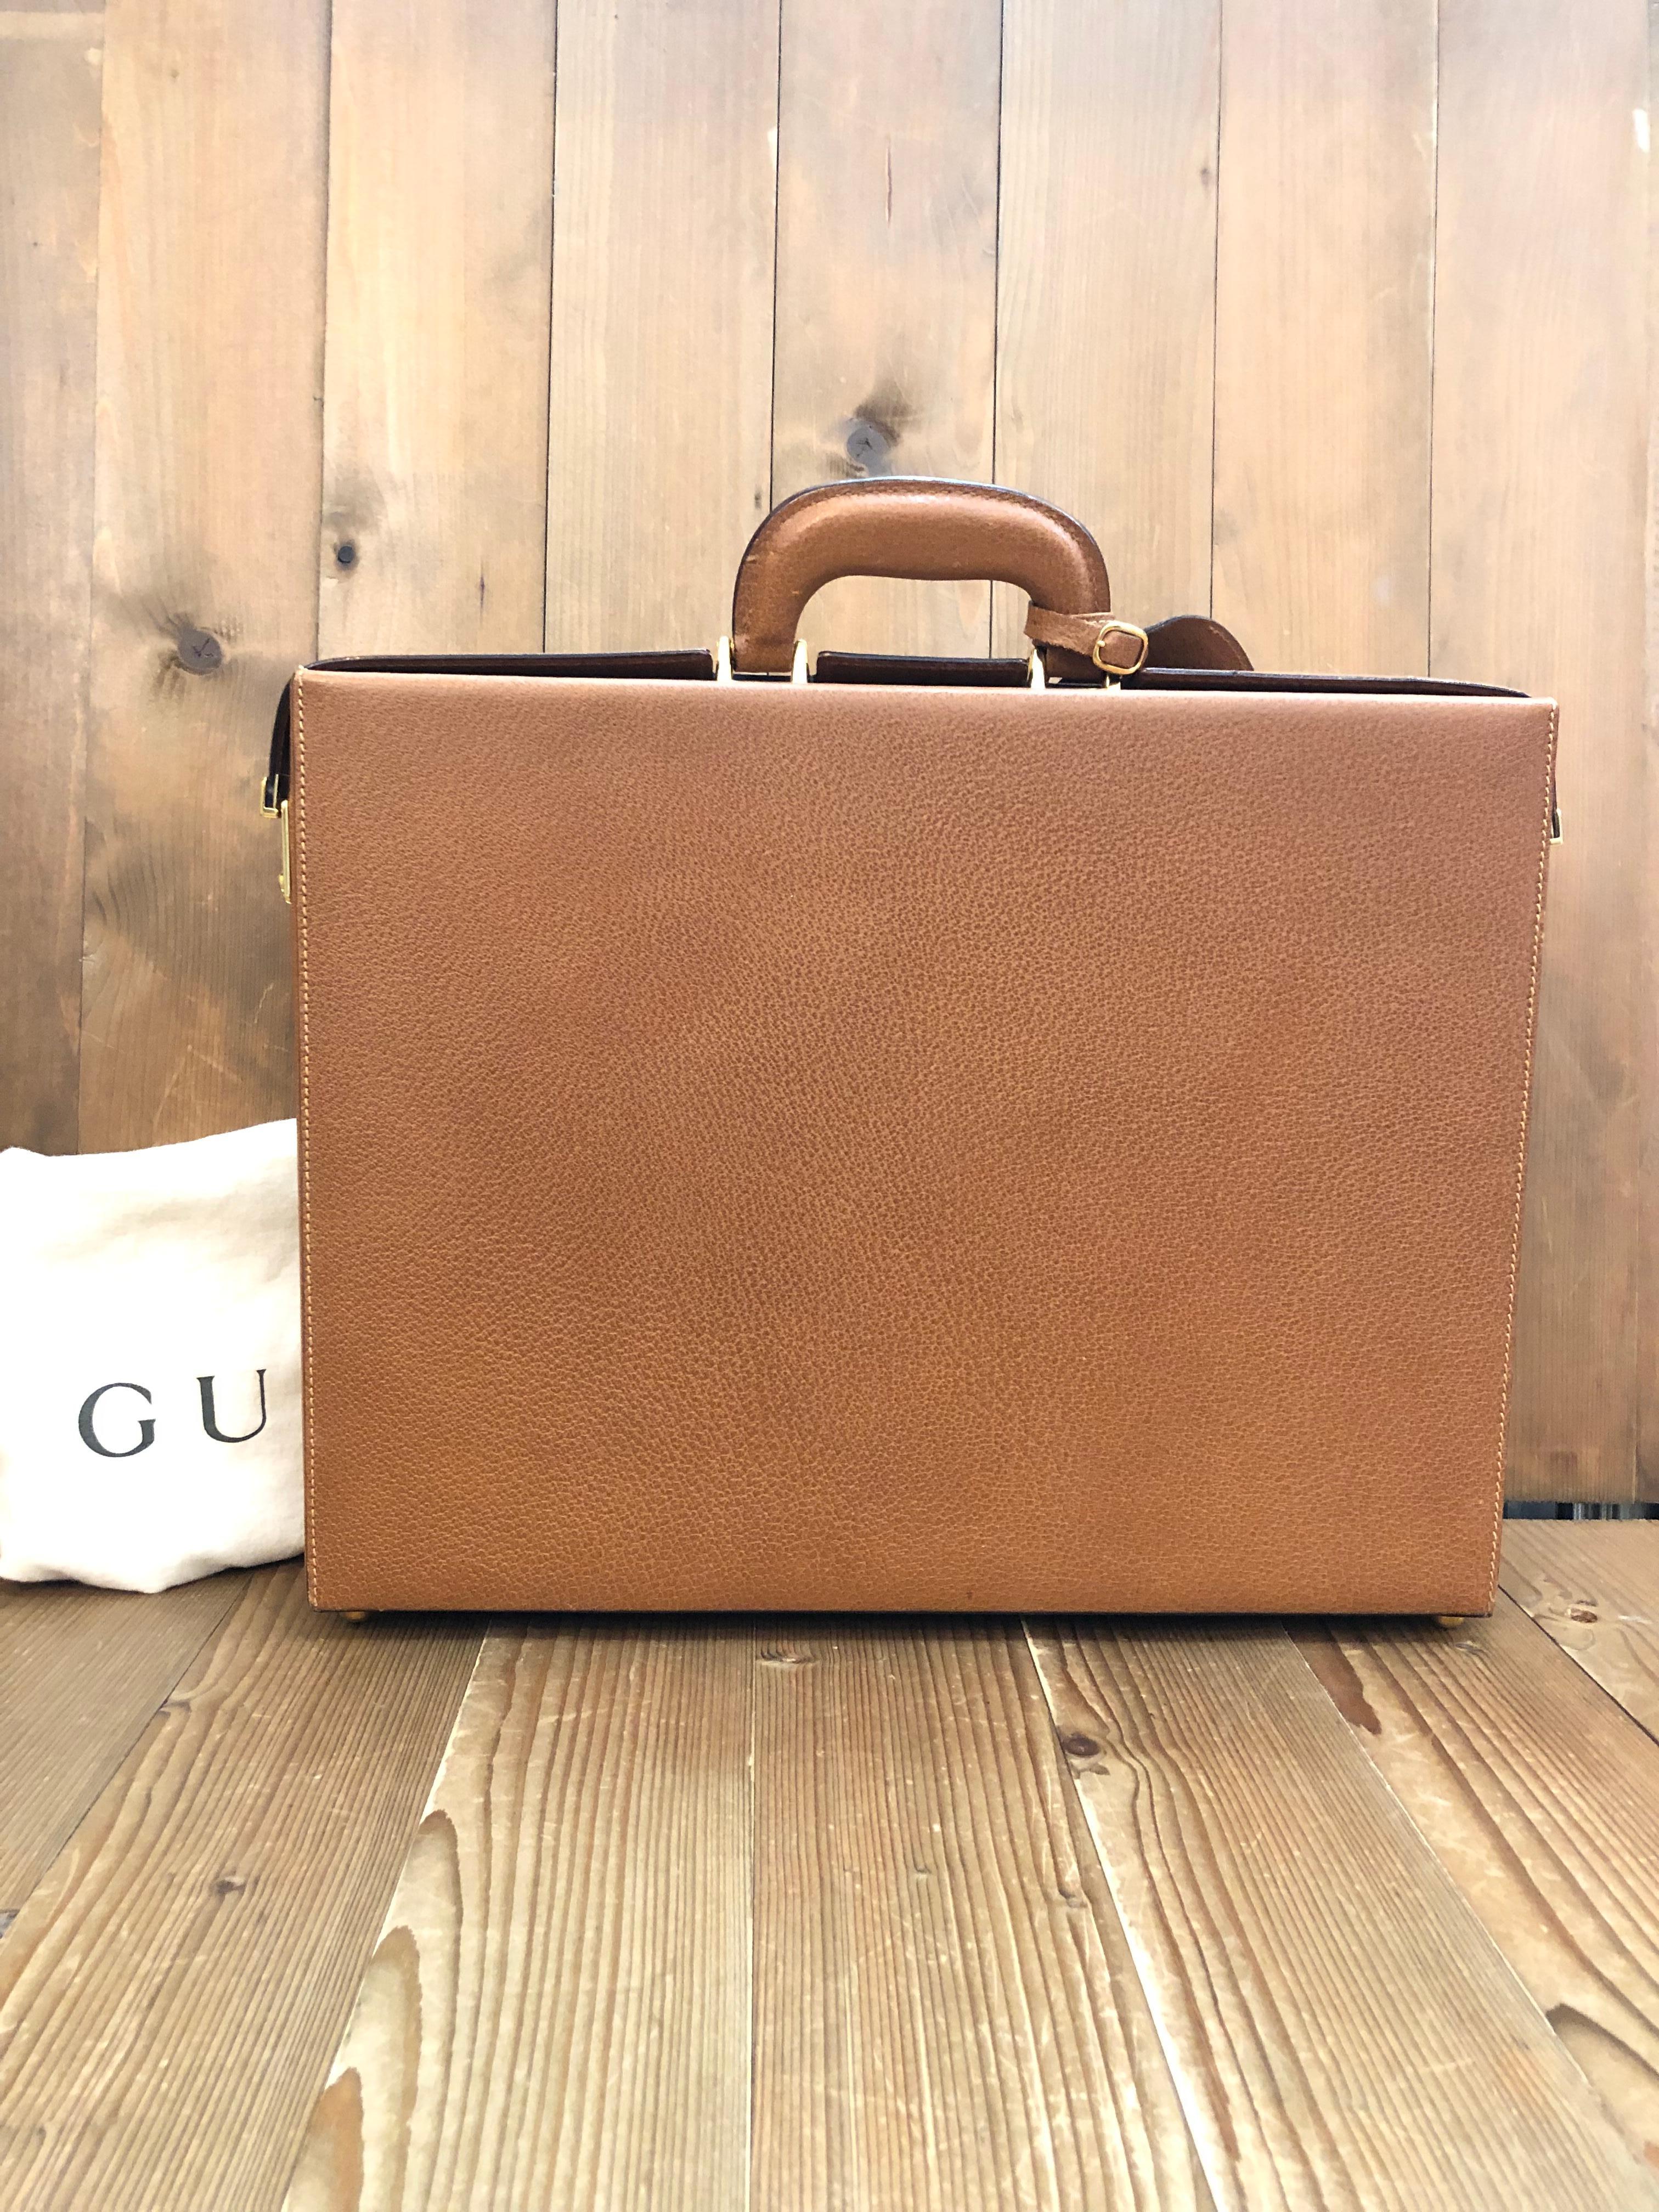 This vintage GUCCI trunk briefcase is crafted of pigskin leather in caramel featuring gold toned hardware. Double side lock closures opens to a luxurious nubuck leather interior in beige featuring pockets and holders of the same leather. Made in